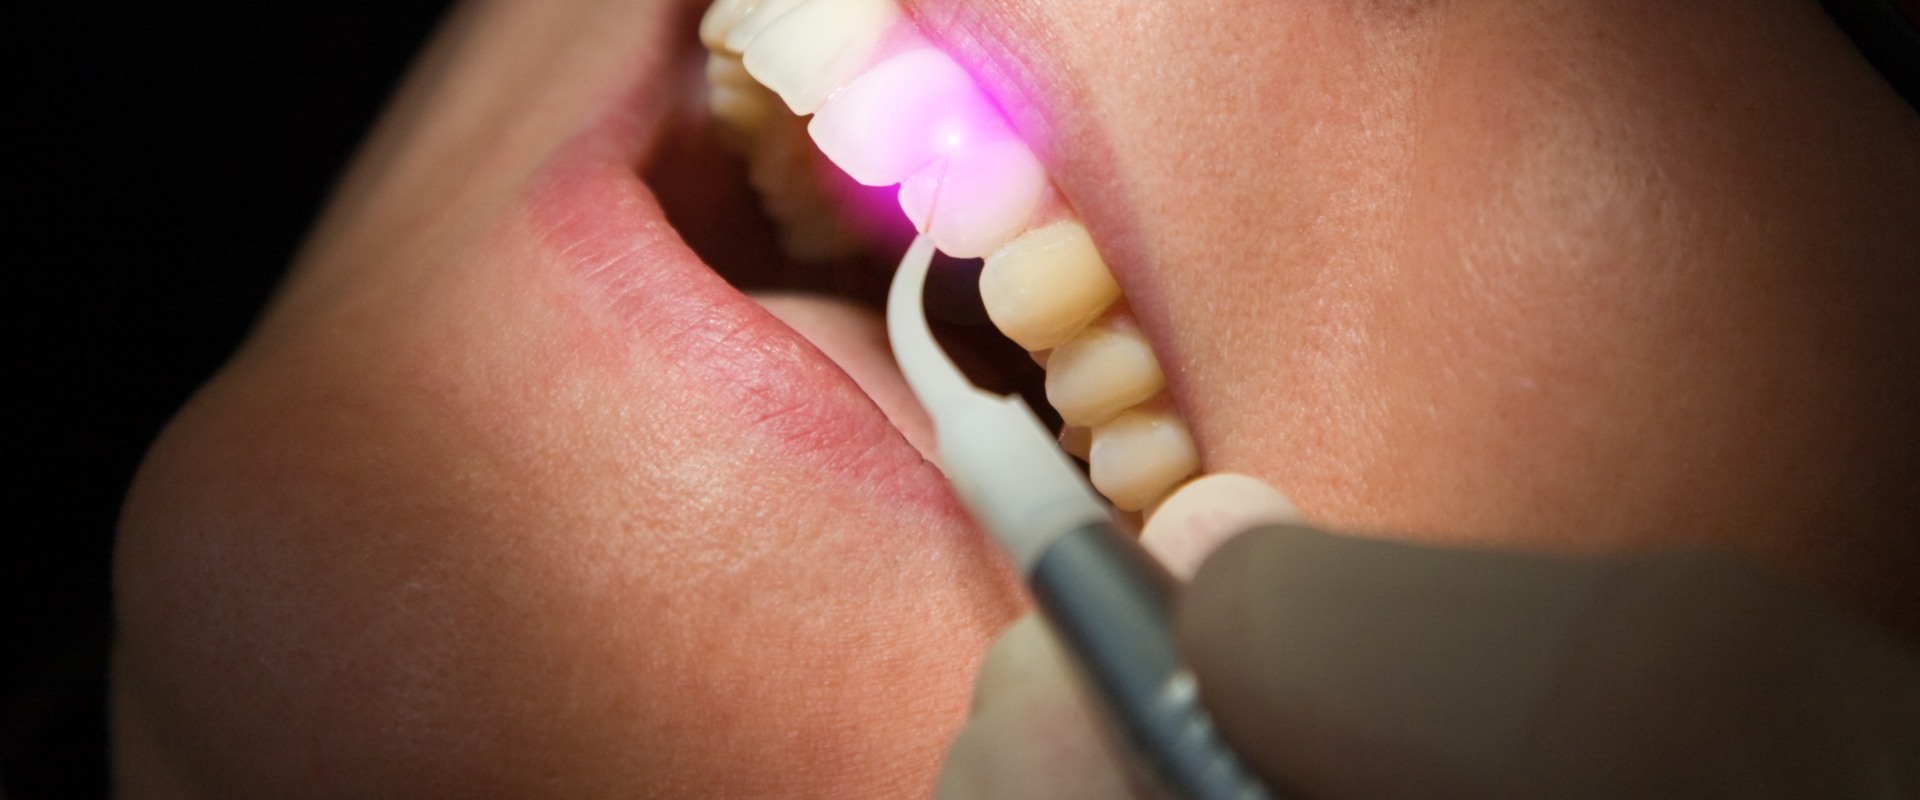 Is laser treatment good for gums?